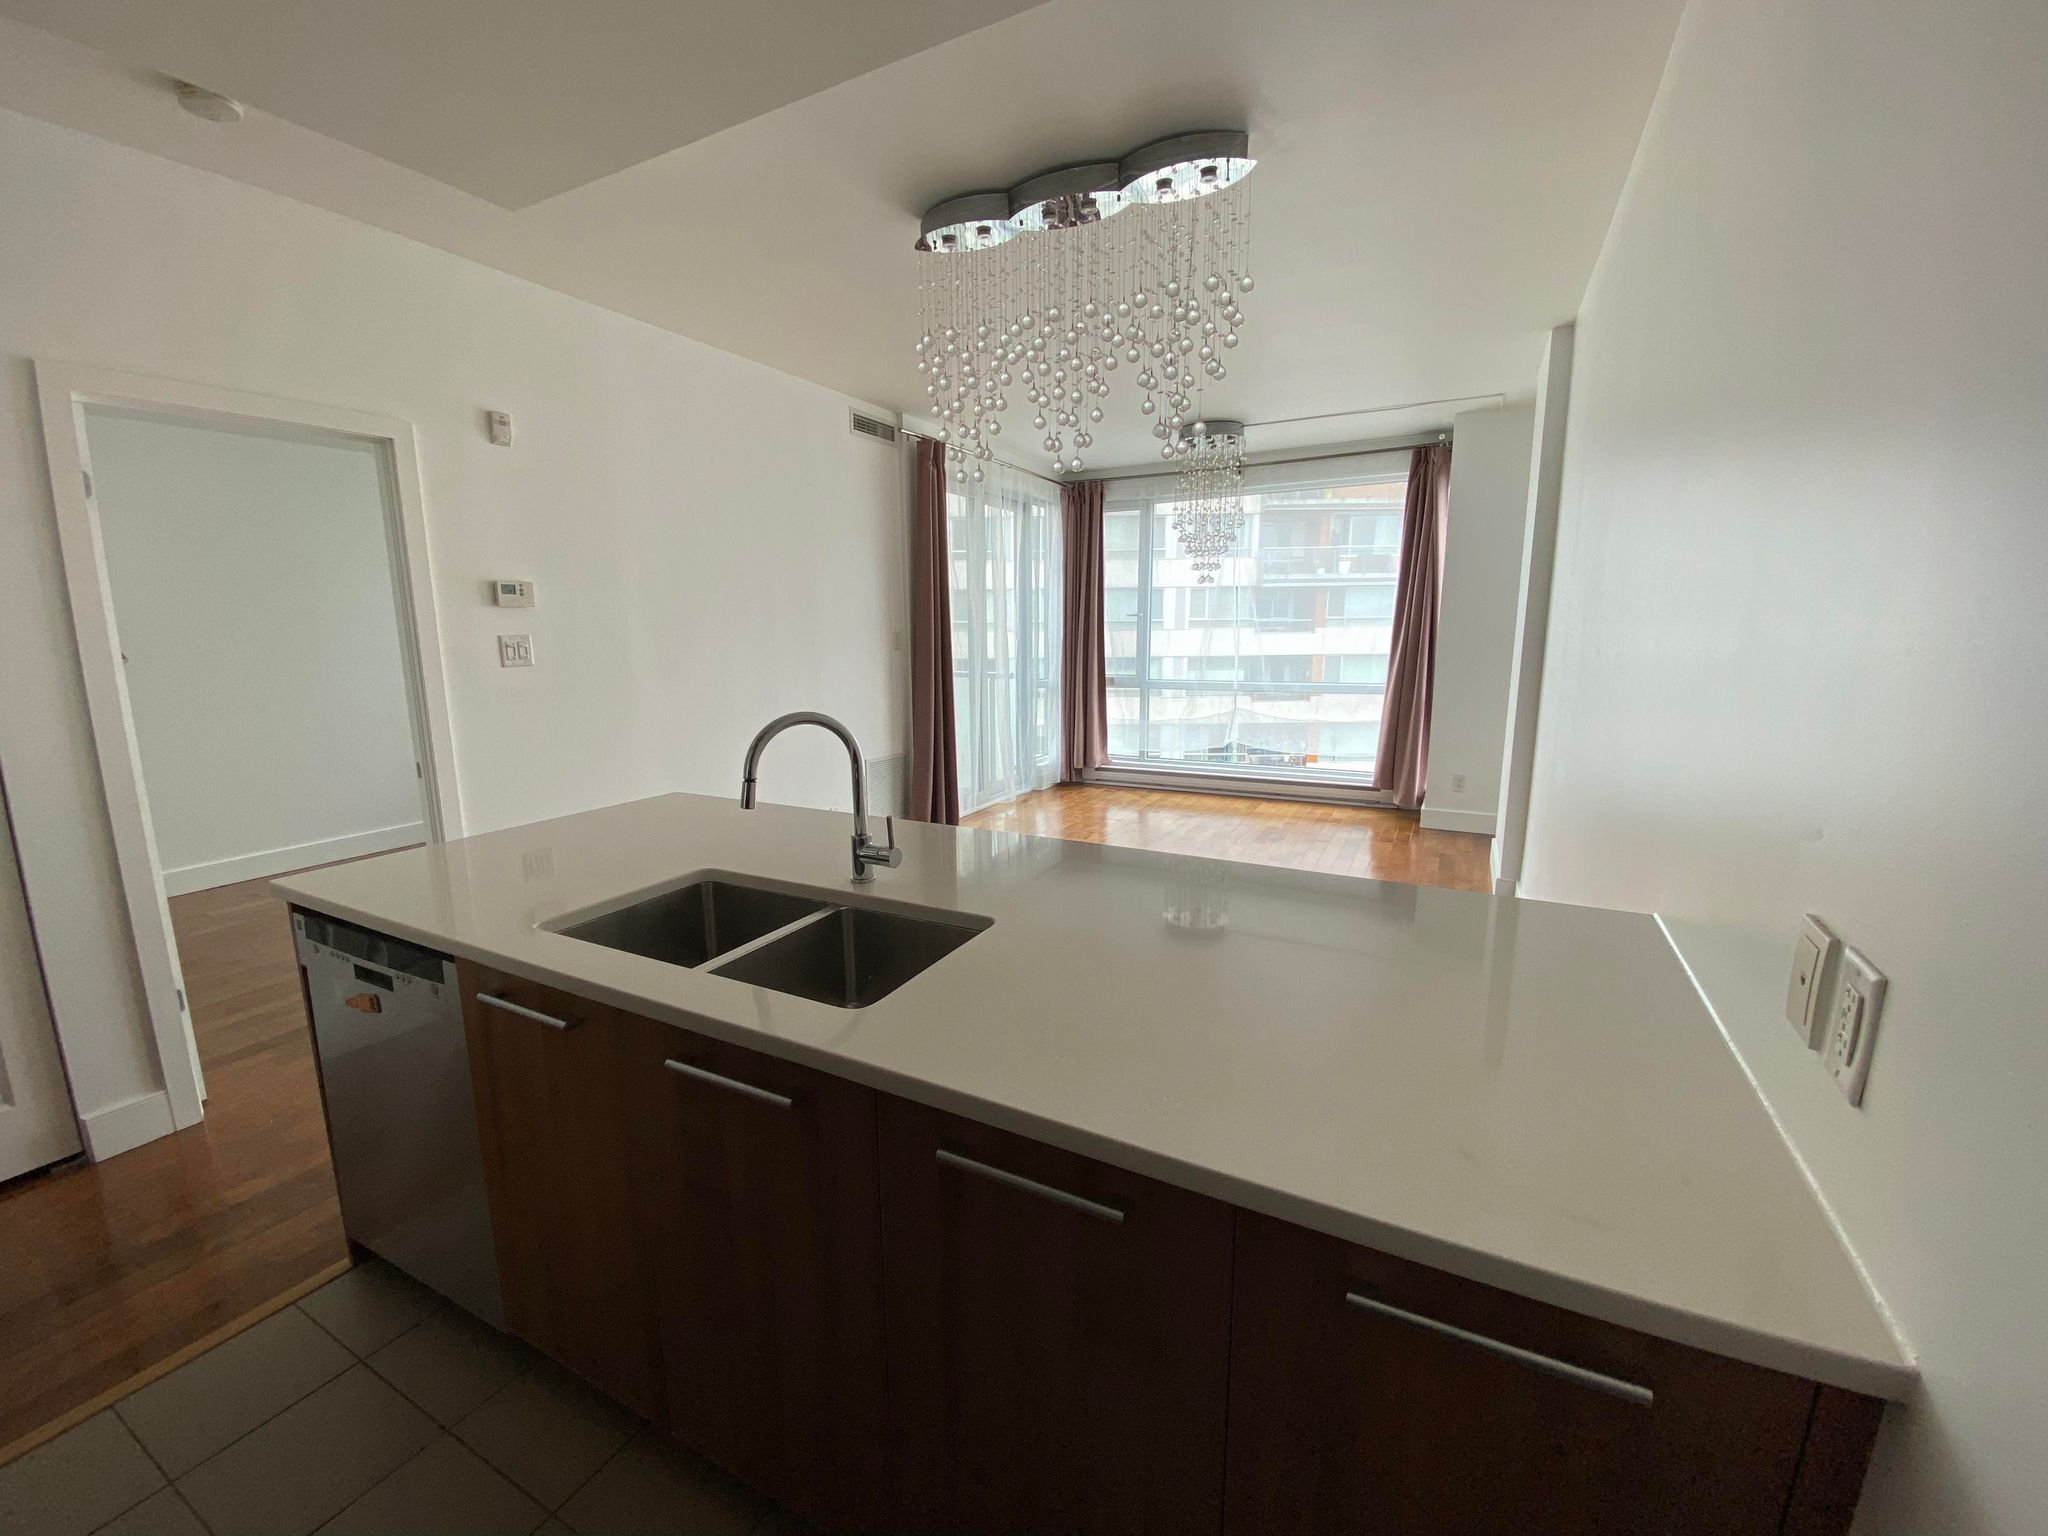 Condo for rent in the Olympic Village